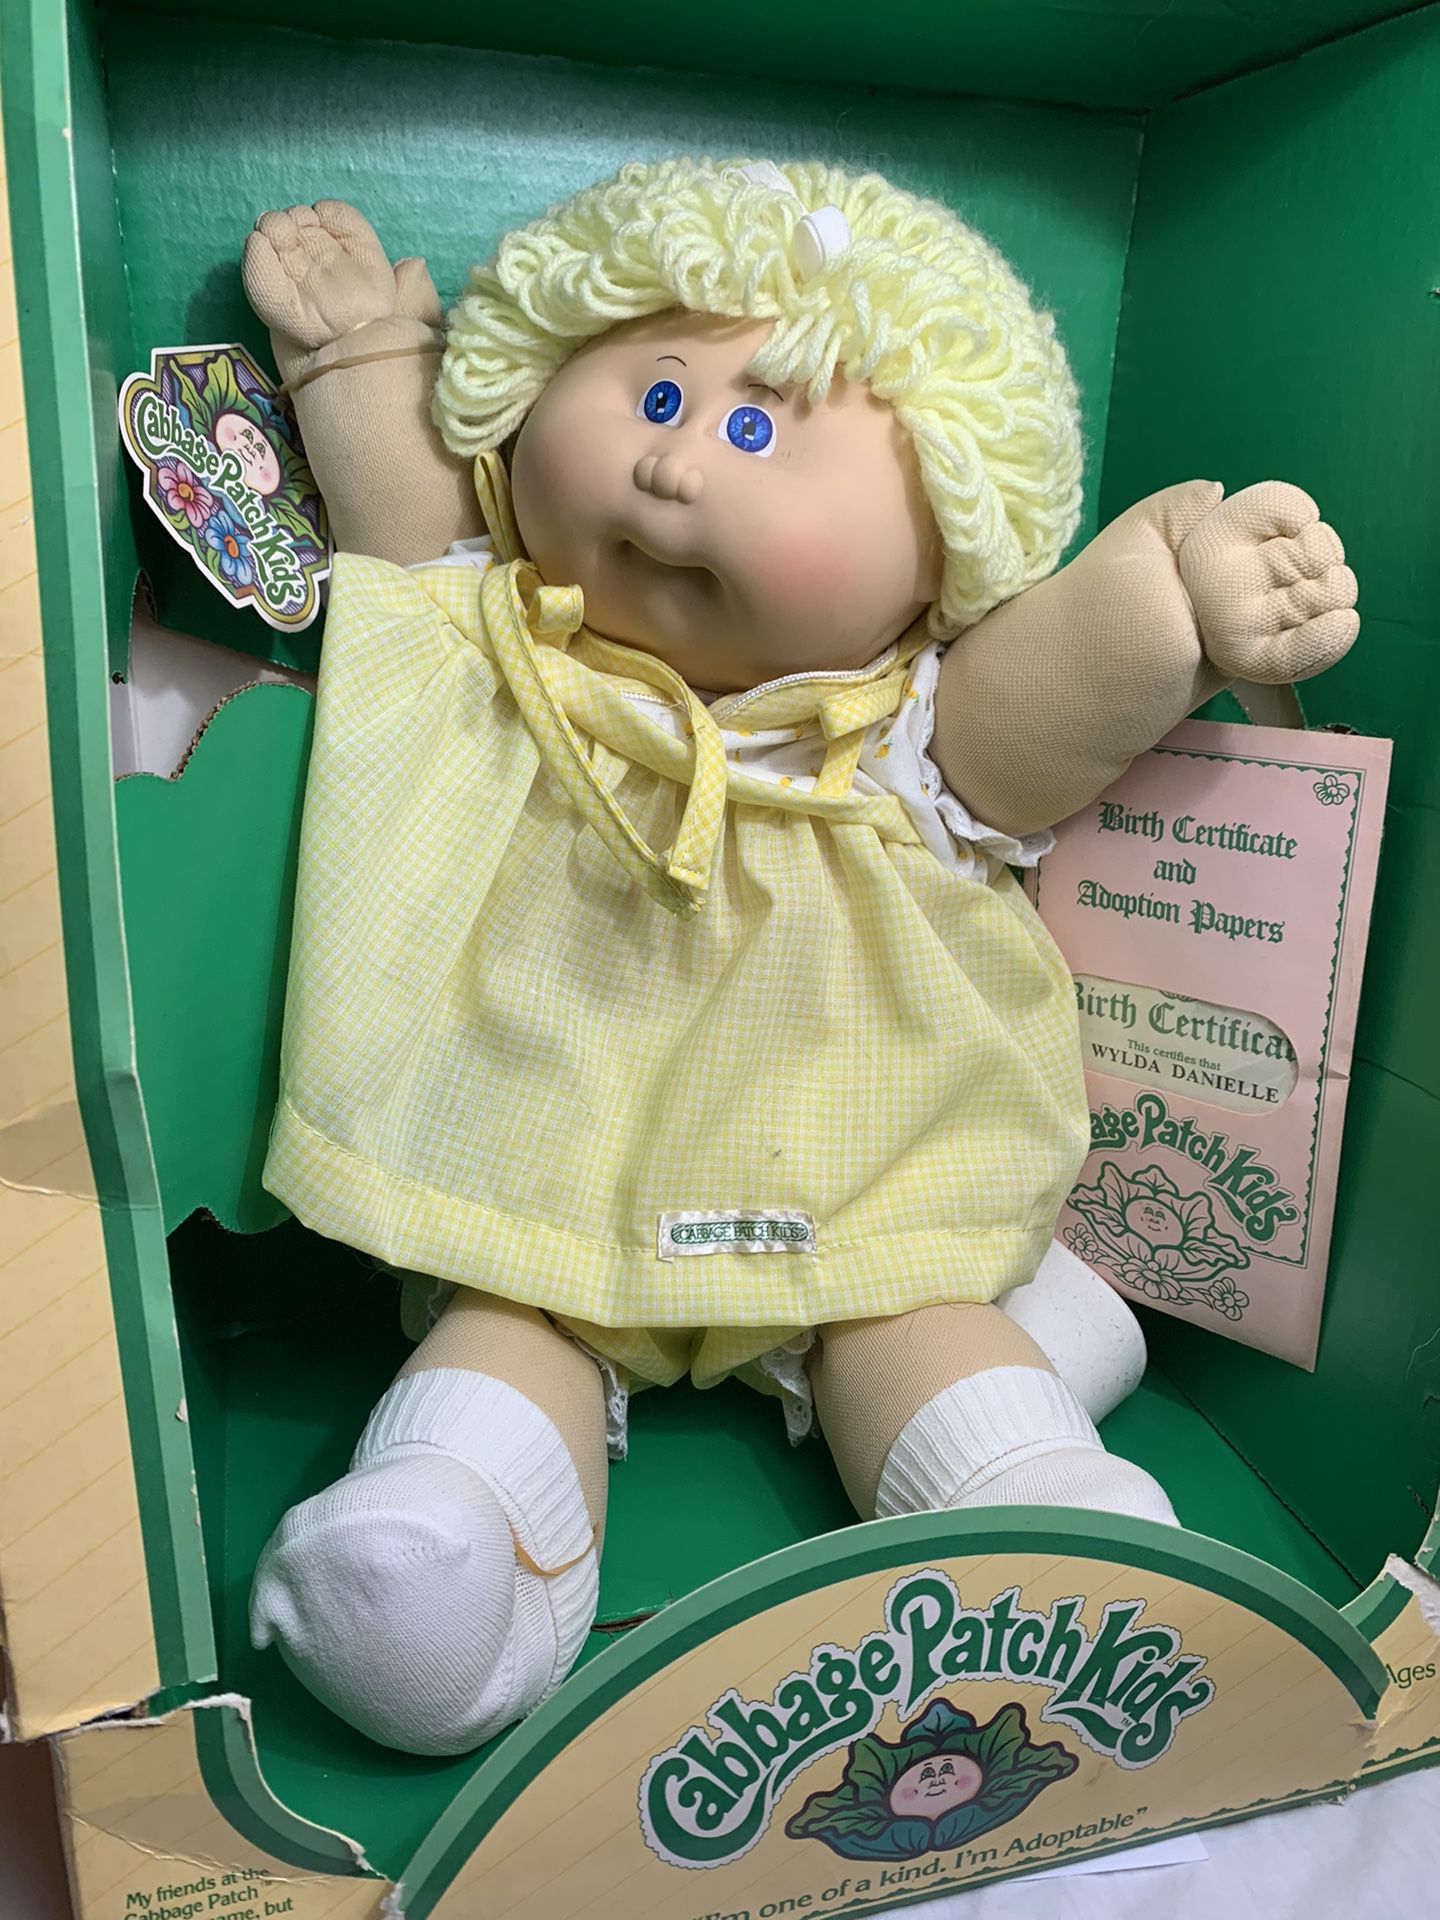 1983 Cabbage Patch  Doll